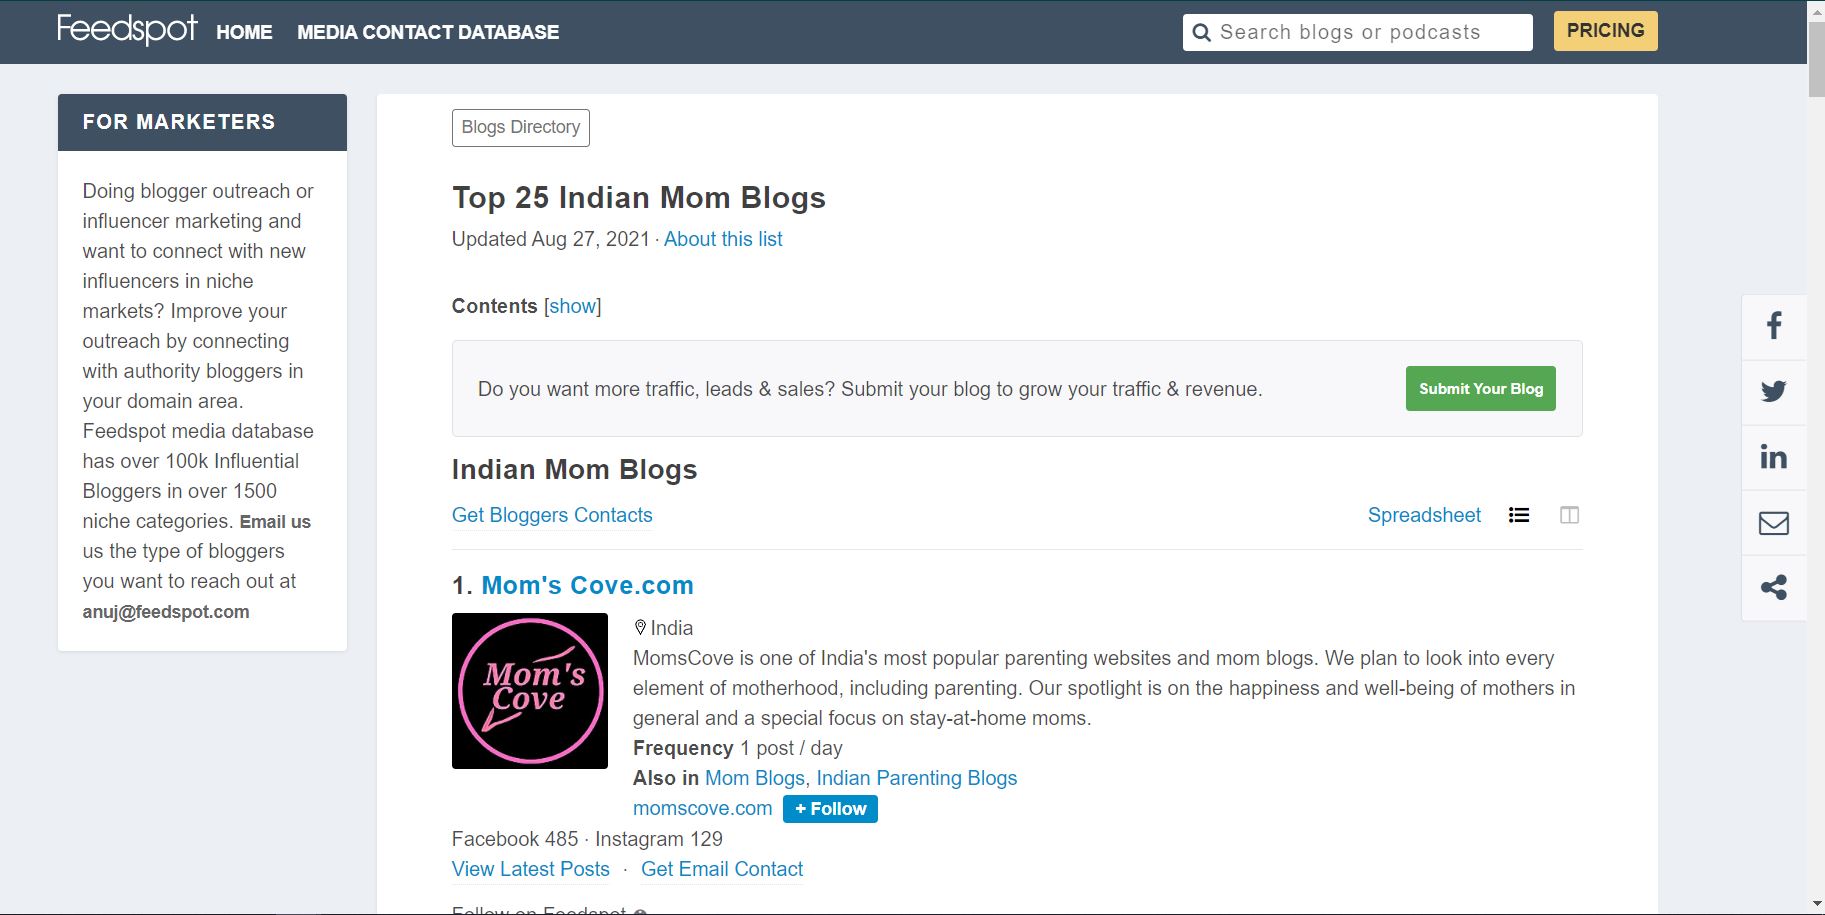 Momscove features in top 25 mom blogs in India